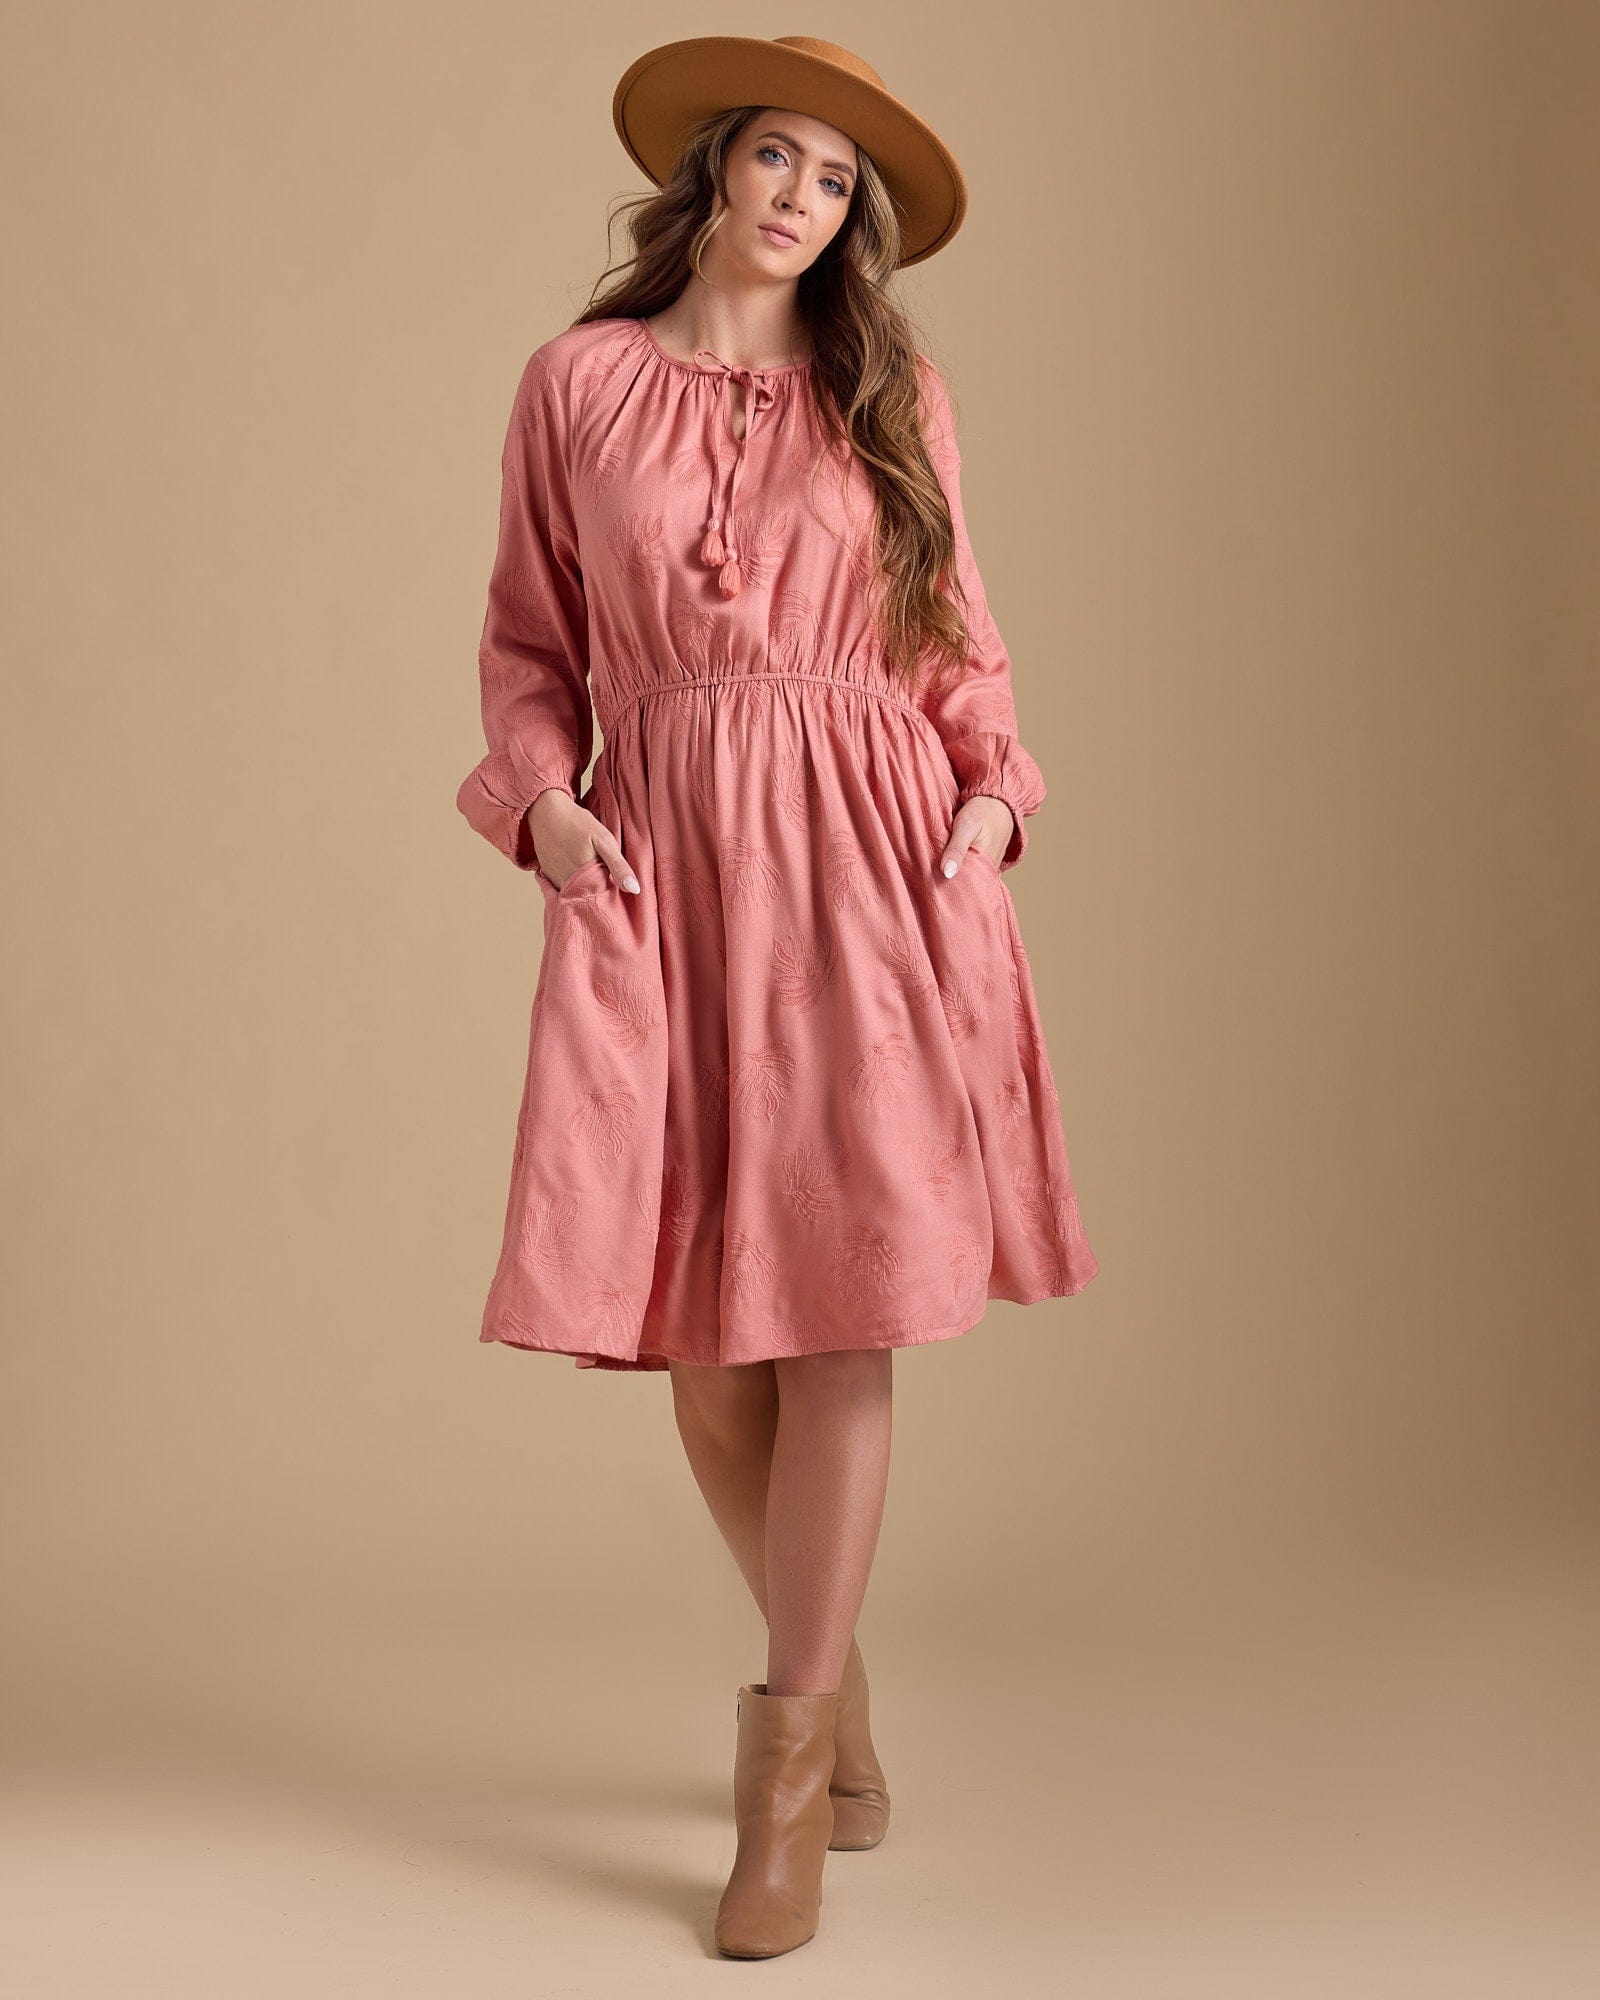 Woman in a long sleeve, knee-length pink dress with pockets